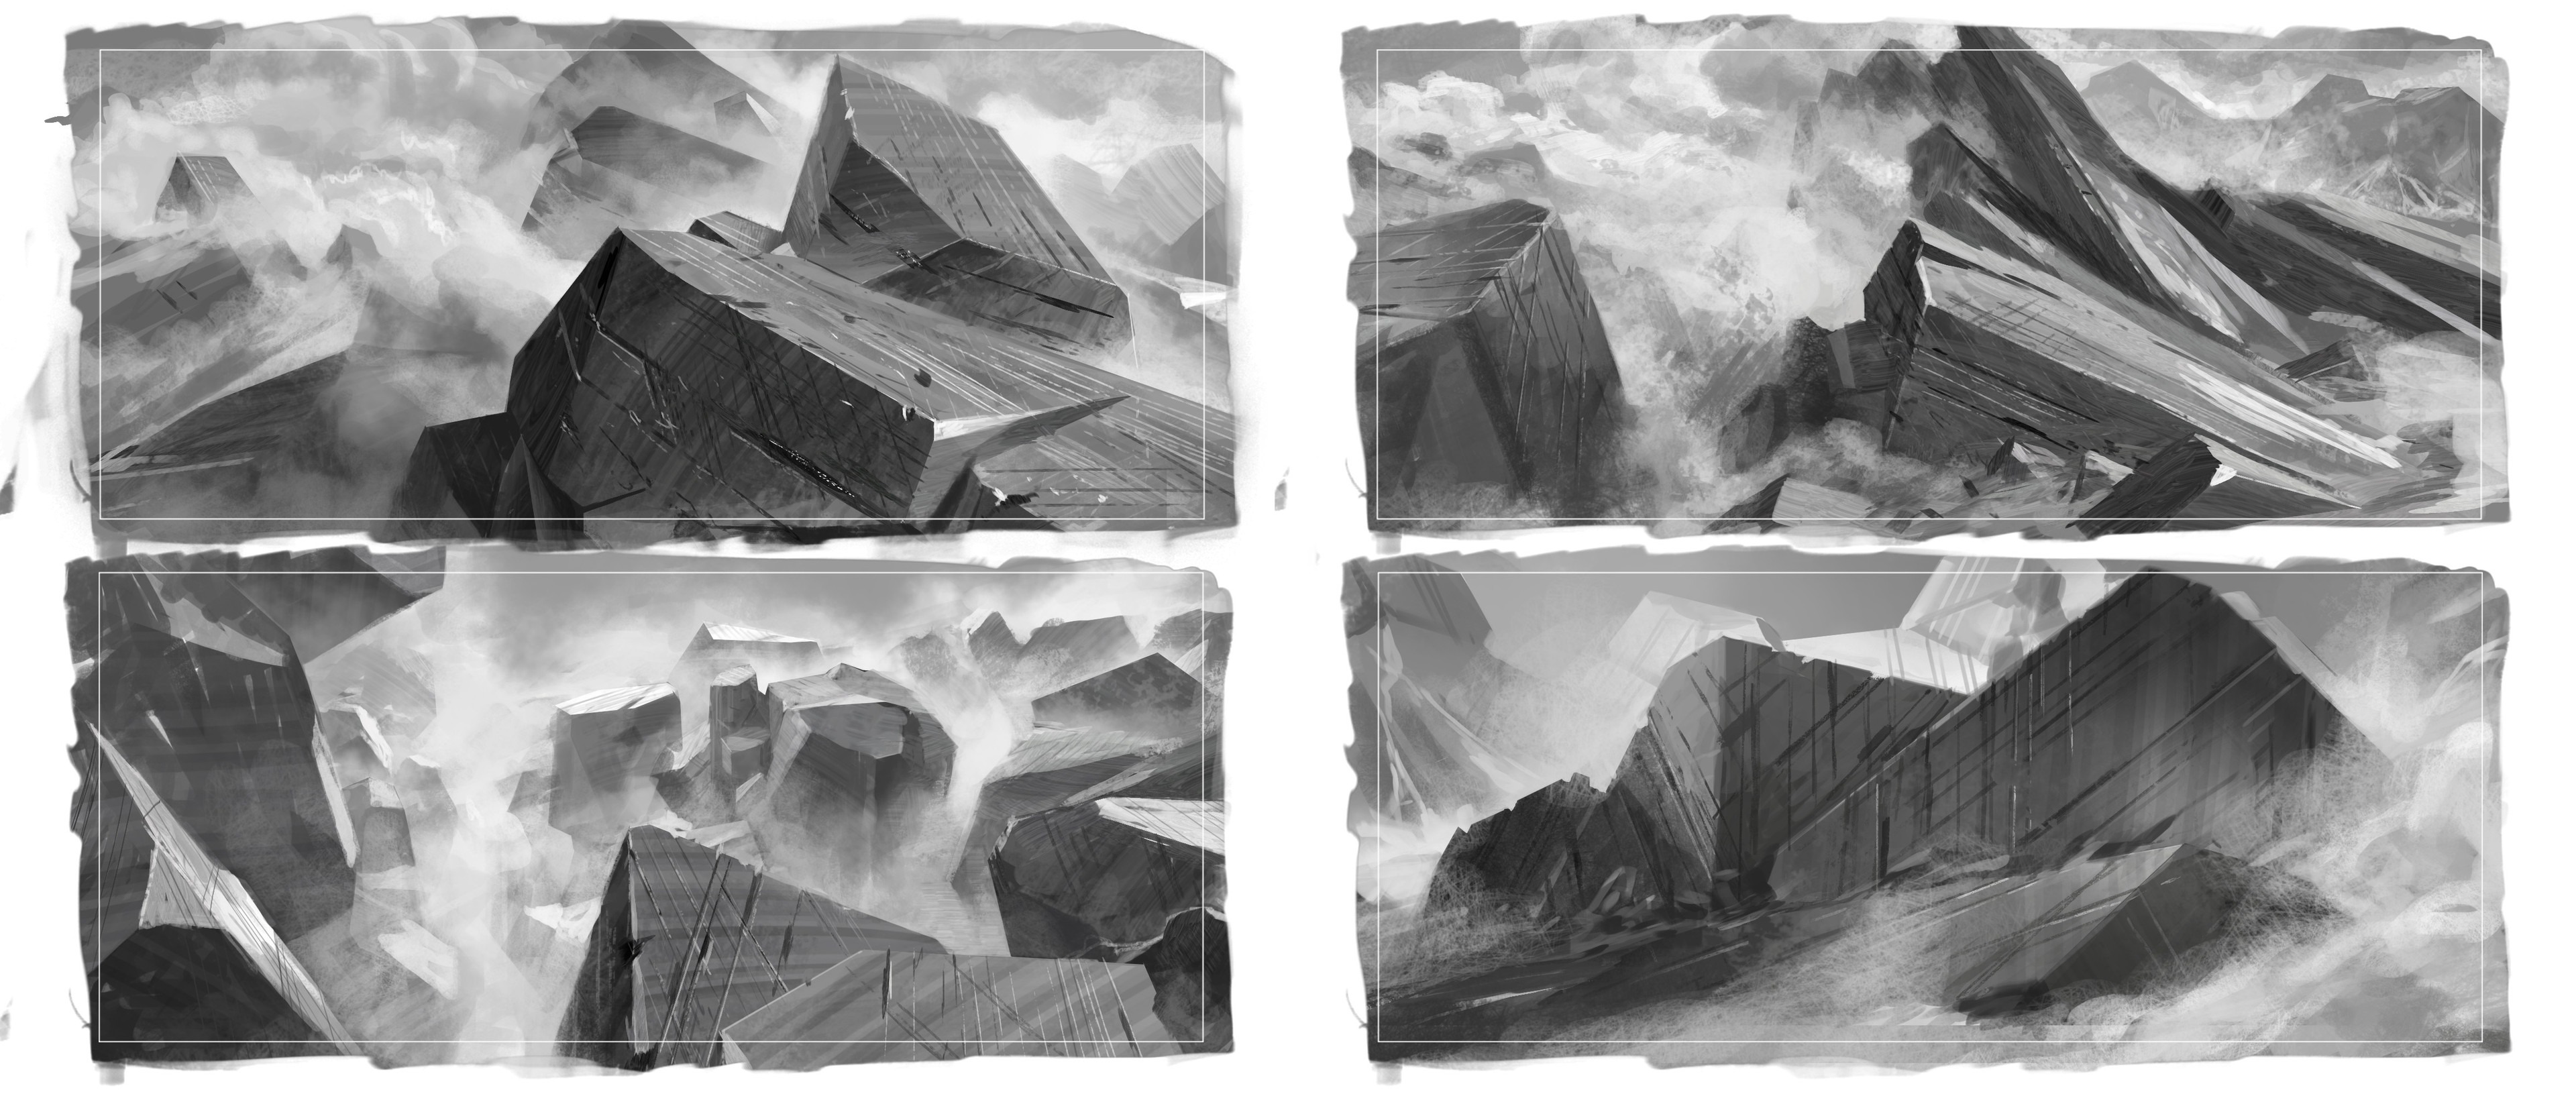 More thumbnails. I might do as much as a dozen of these before settling on a few to take to a full-blown scene. 